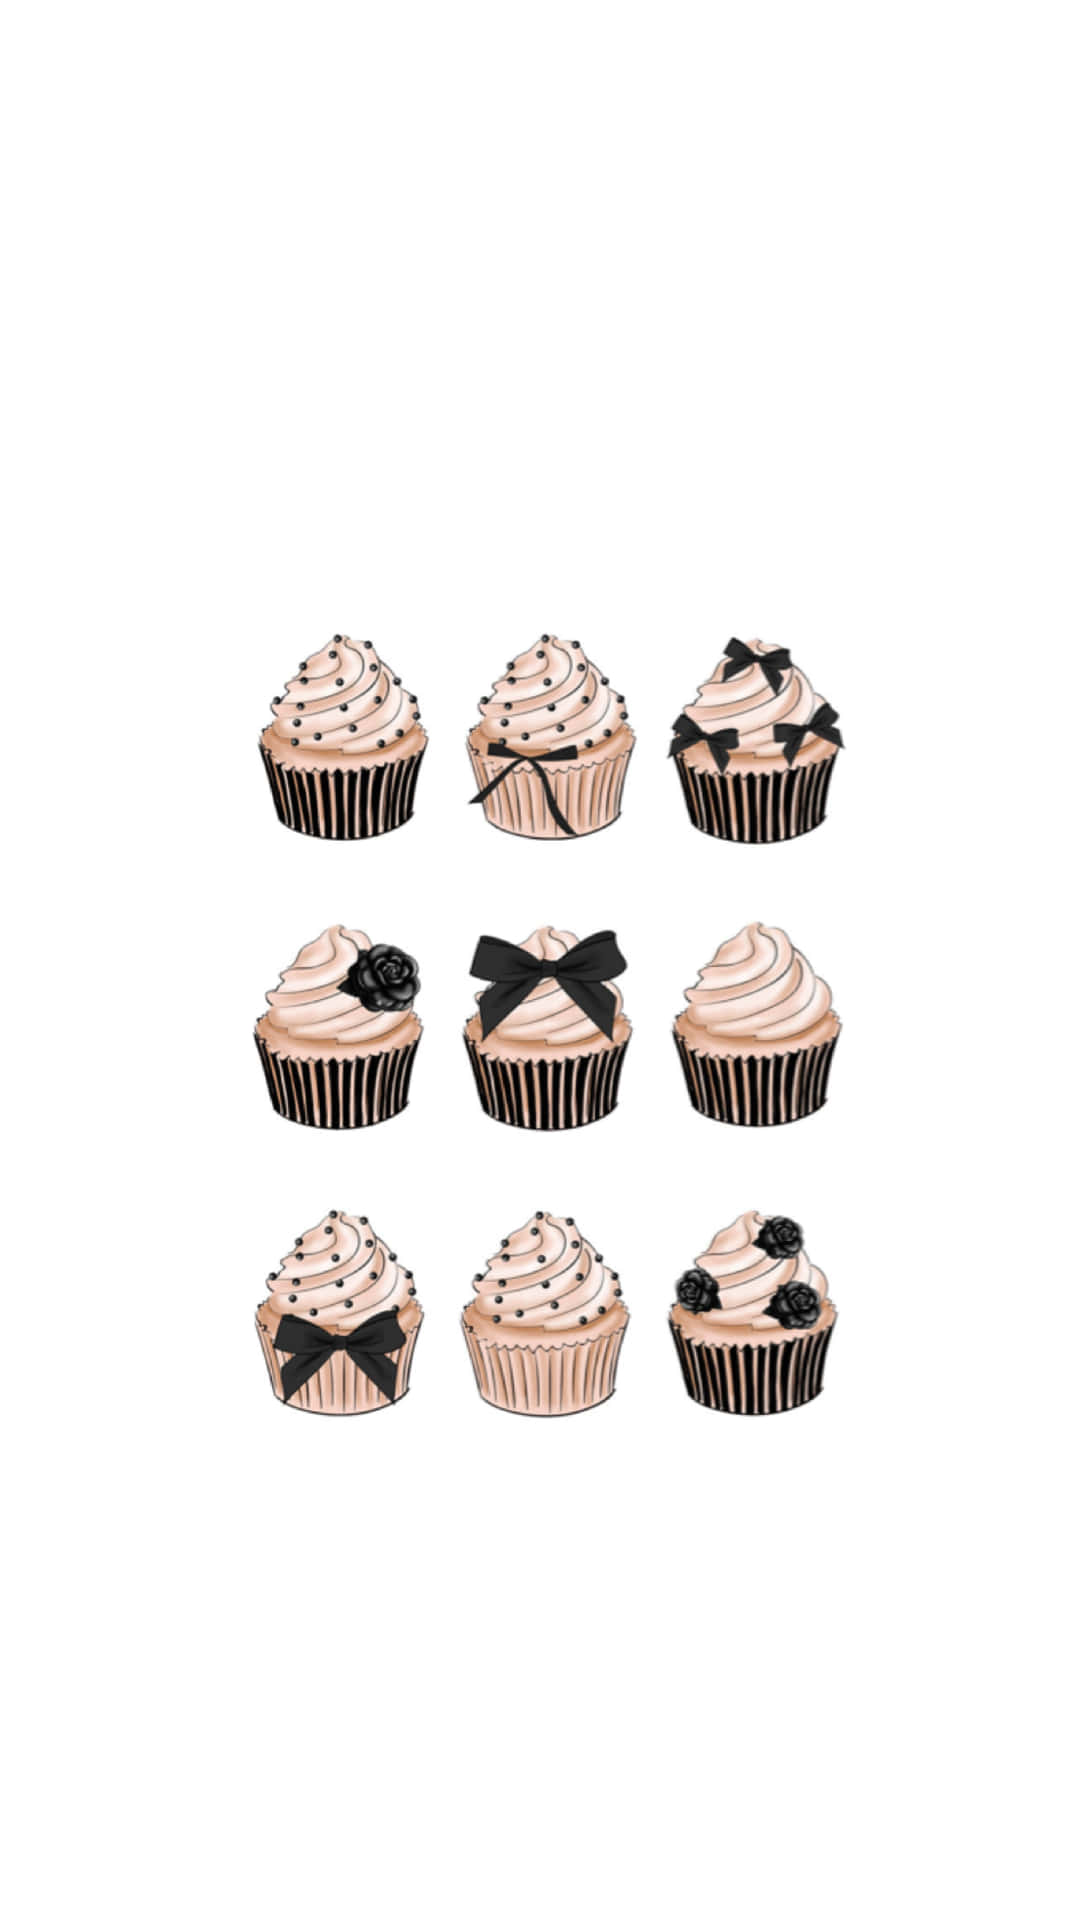 Cupcakes With Bows And Bows Wallpaper